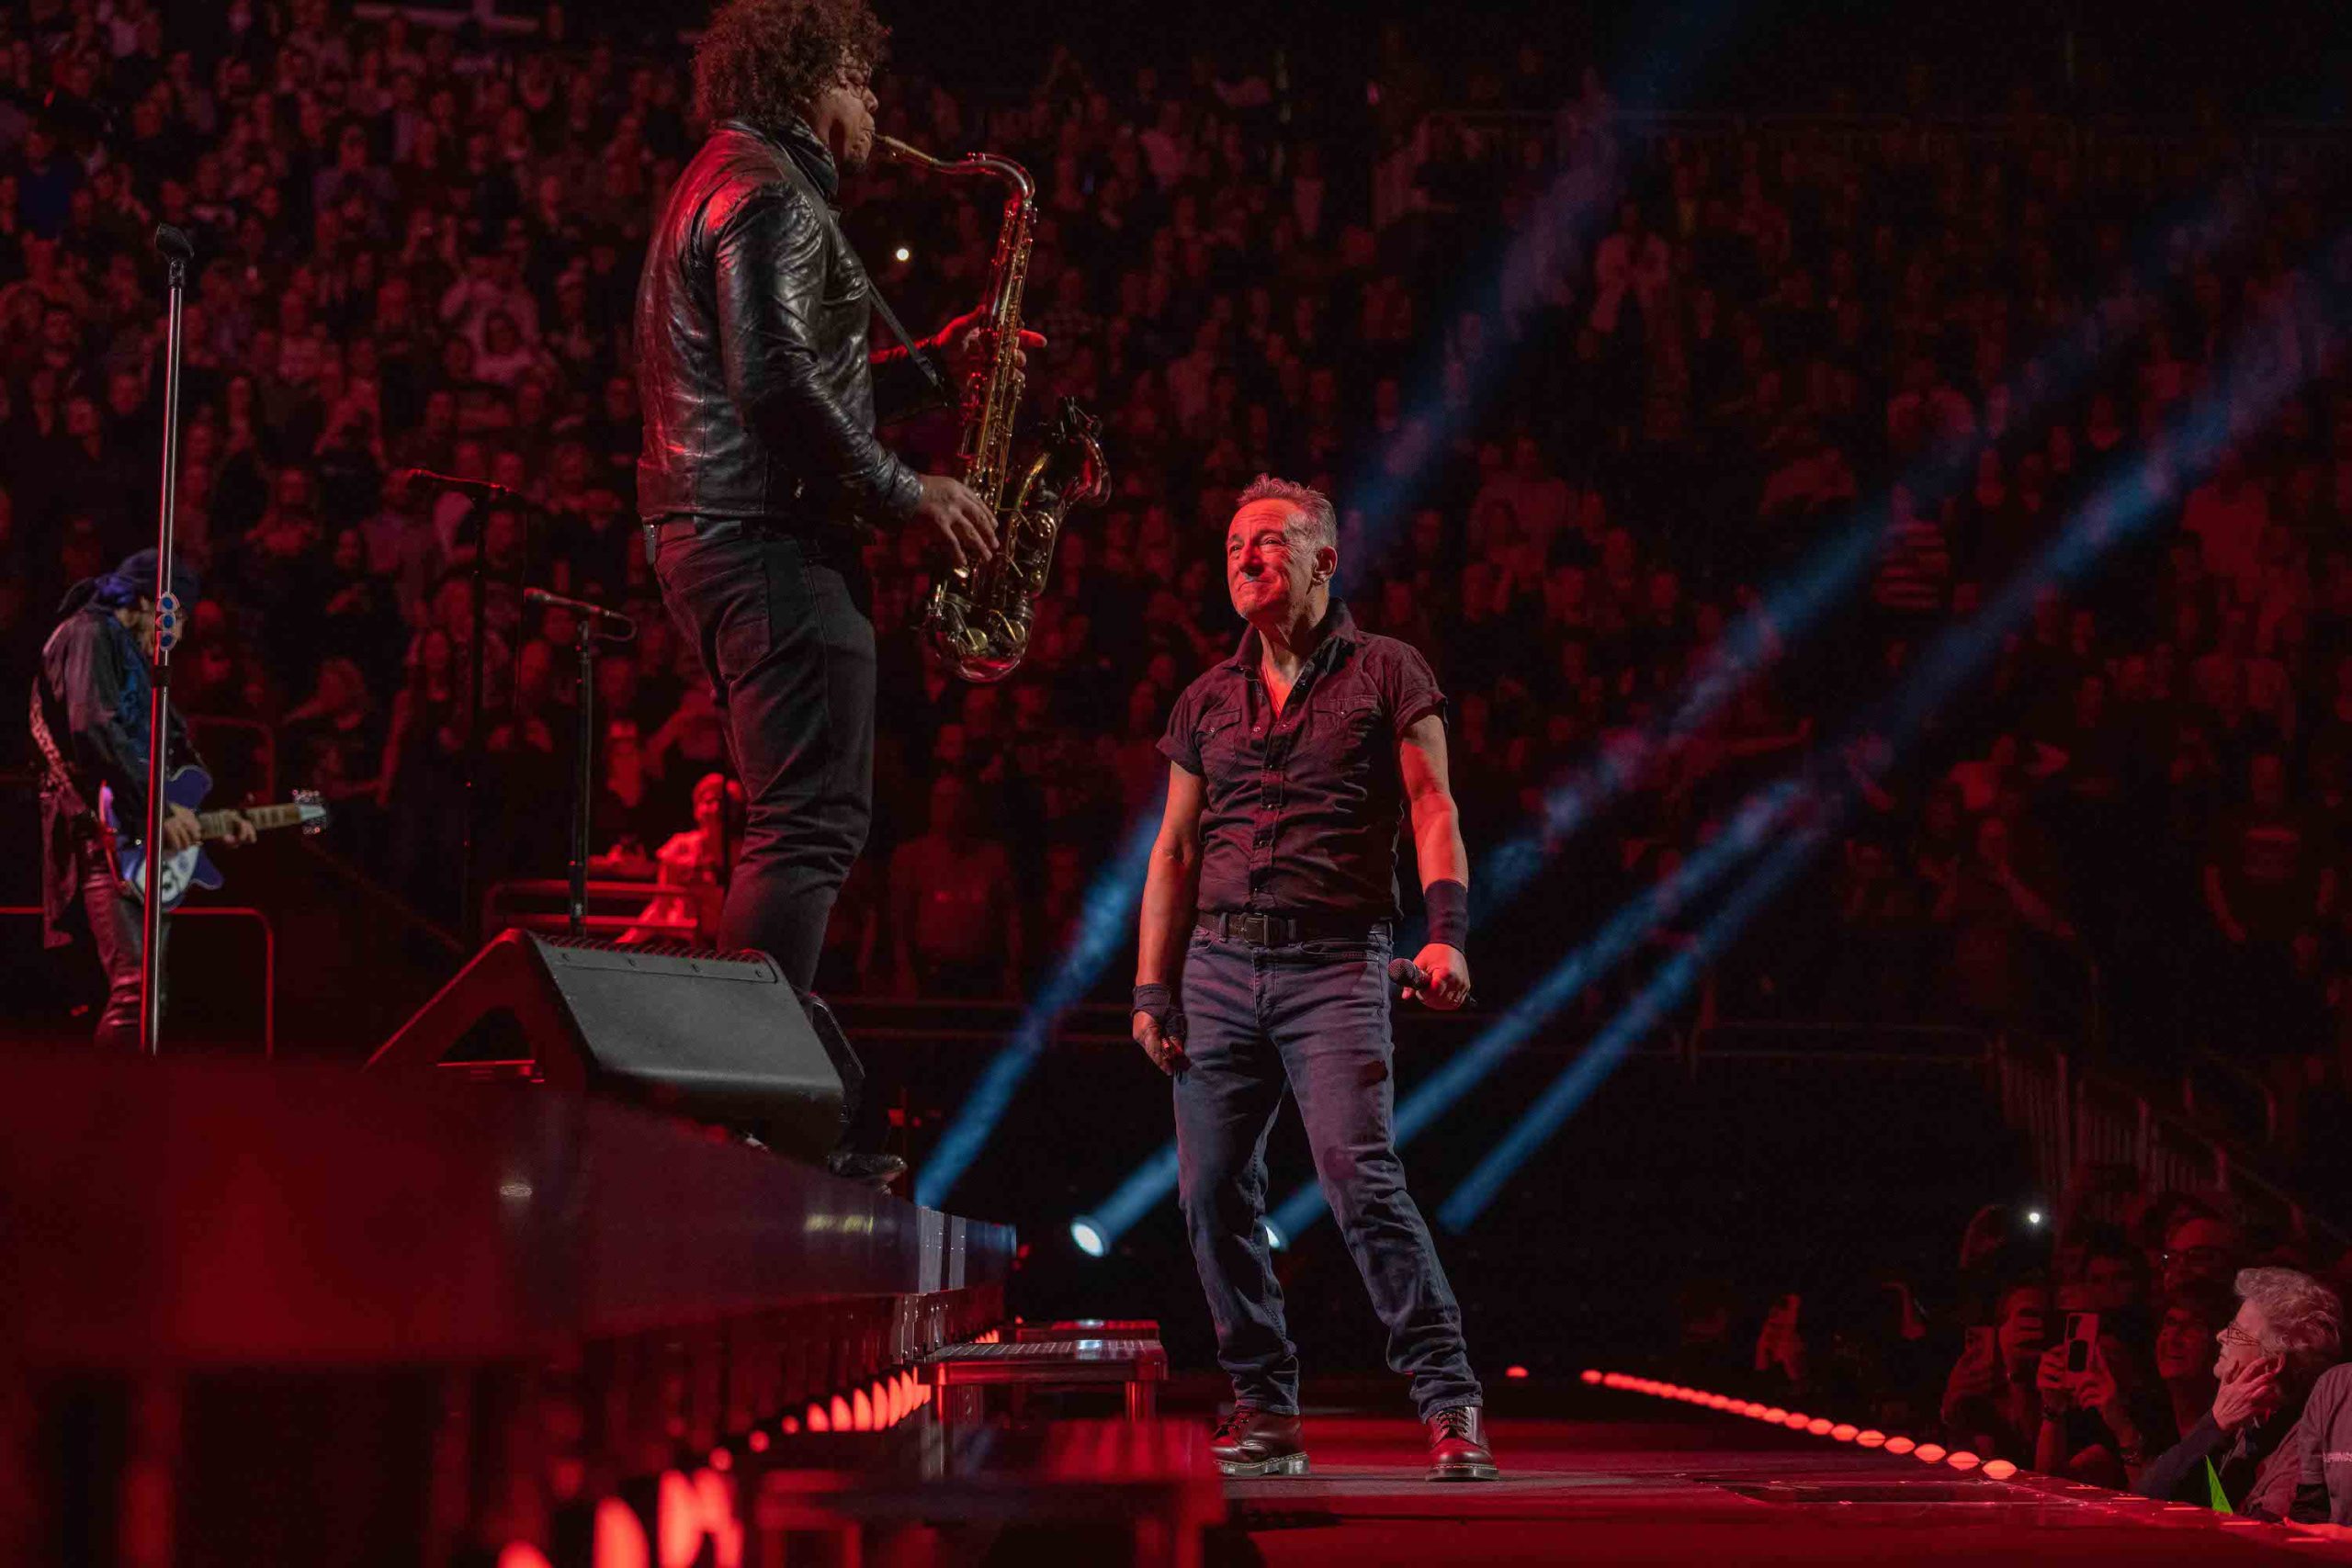 Bruce Springsteen & E Street Band at Fiserv Forum, Milwaukee, Wisconsin on March 7, 2023.